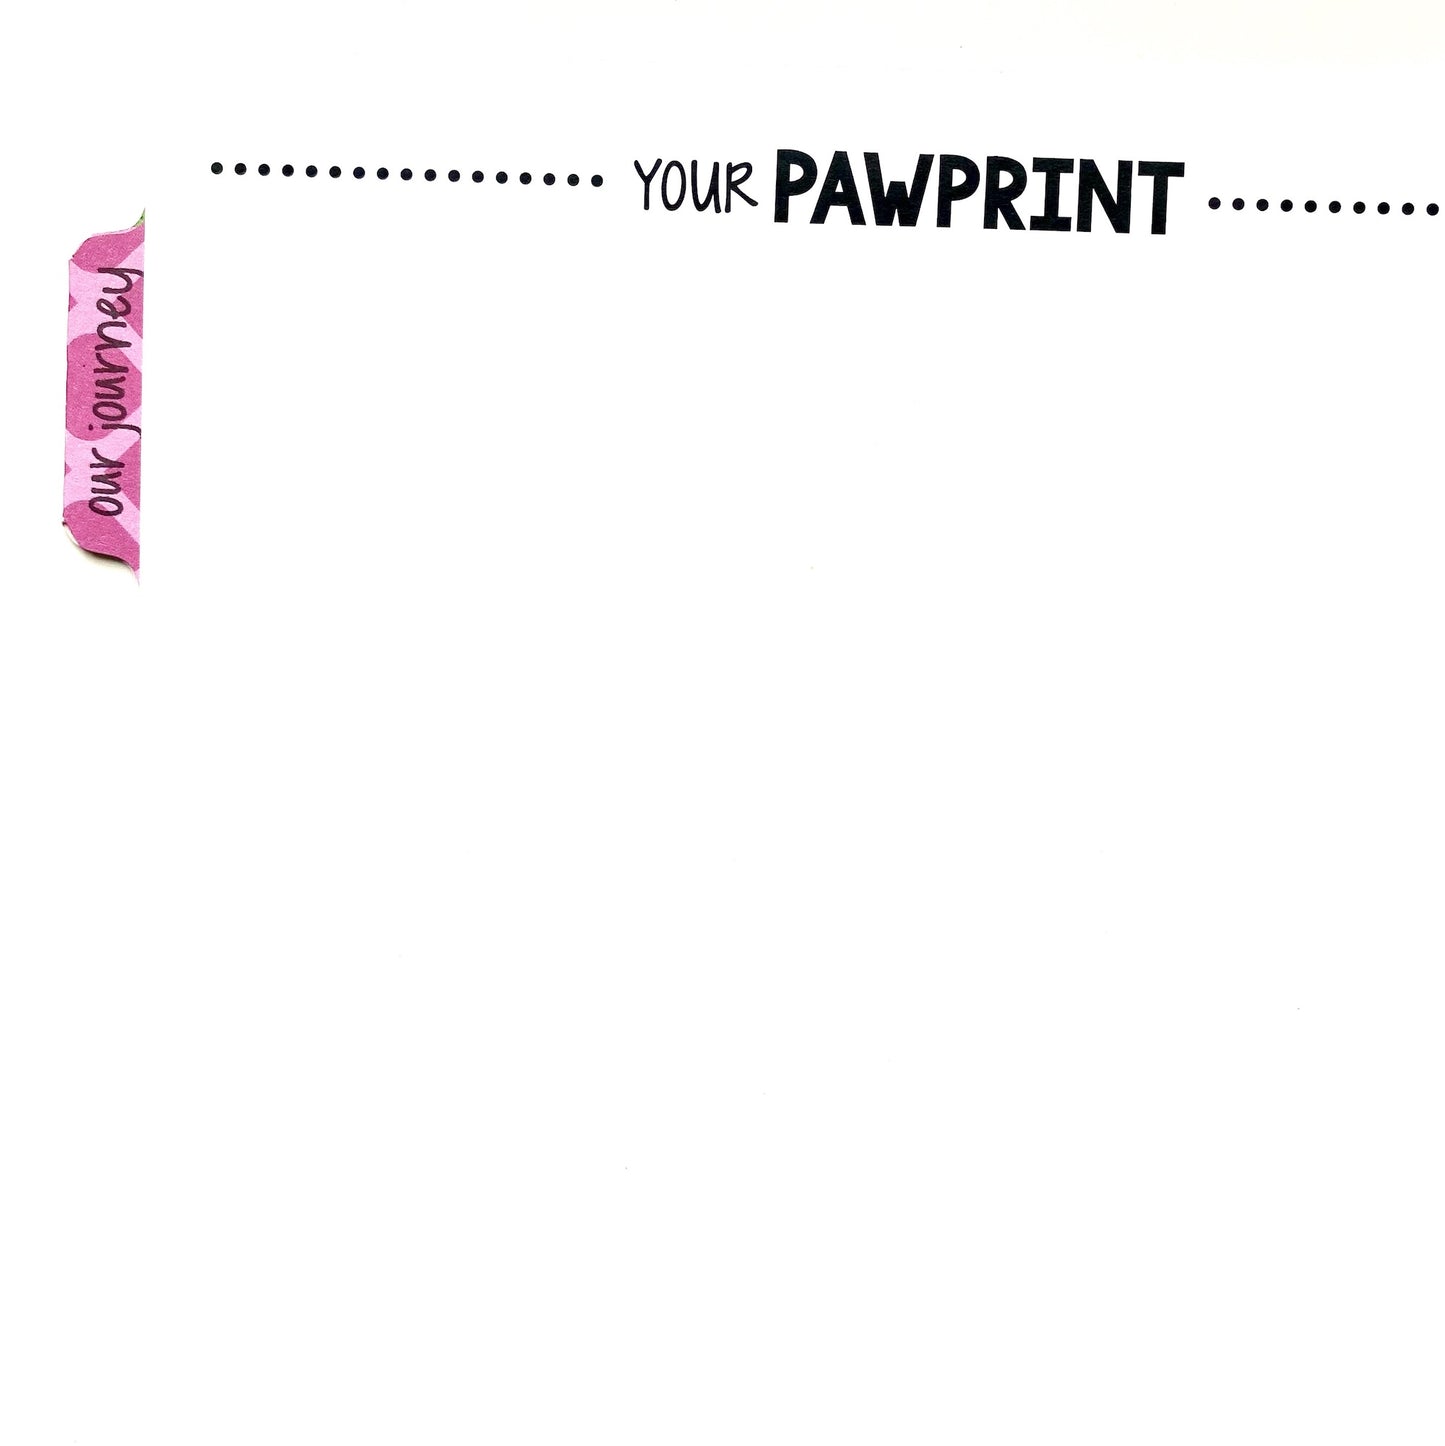 Pawprint page to place your dogs footprint